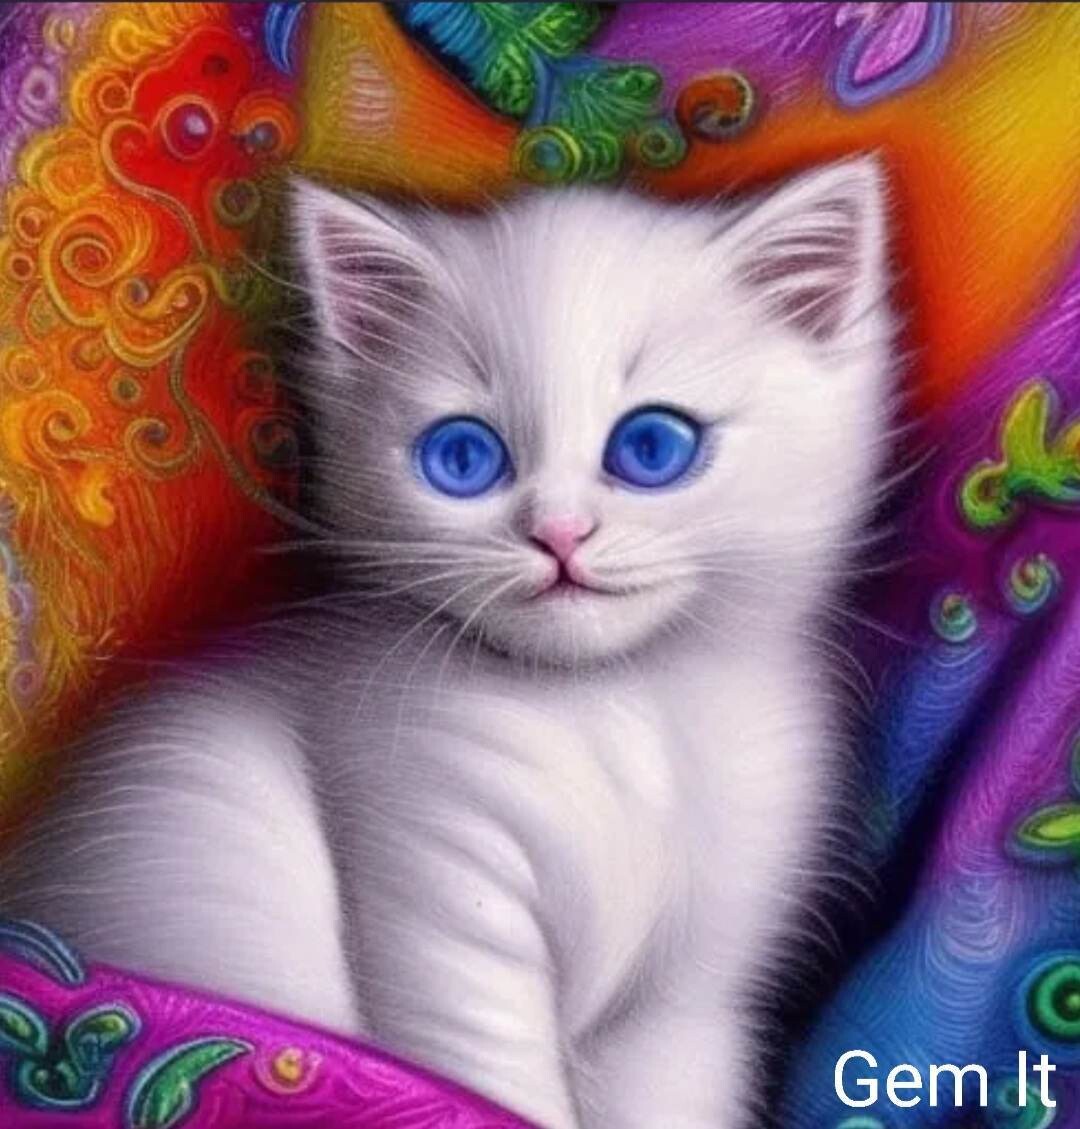 Fluffy White Kitten 2 - Full Drill Diamond Painting - Specially ordered for you. Delivery is approximately 4 - 6 weeks.